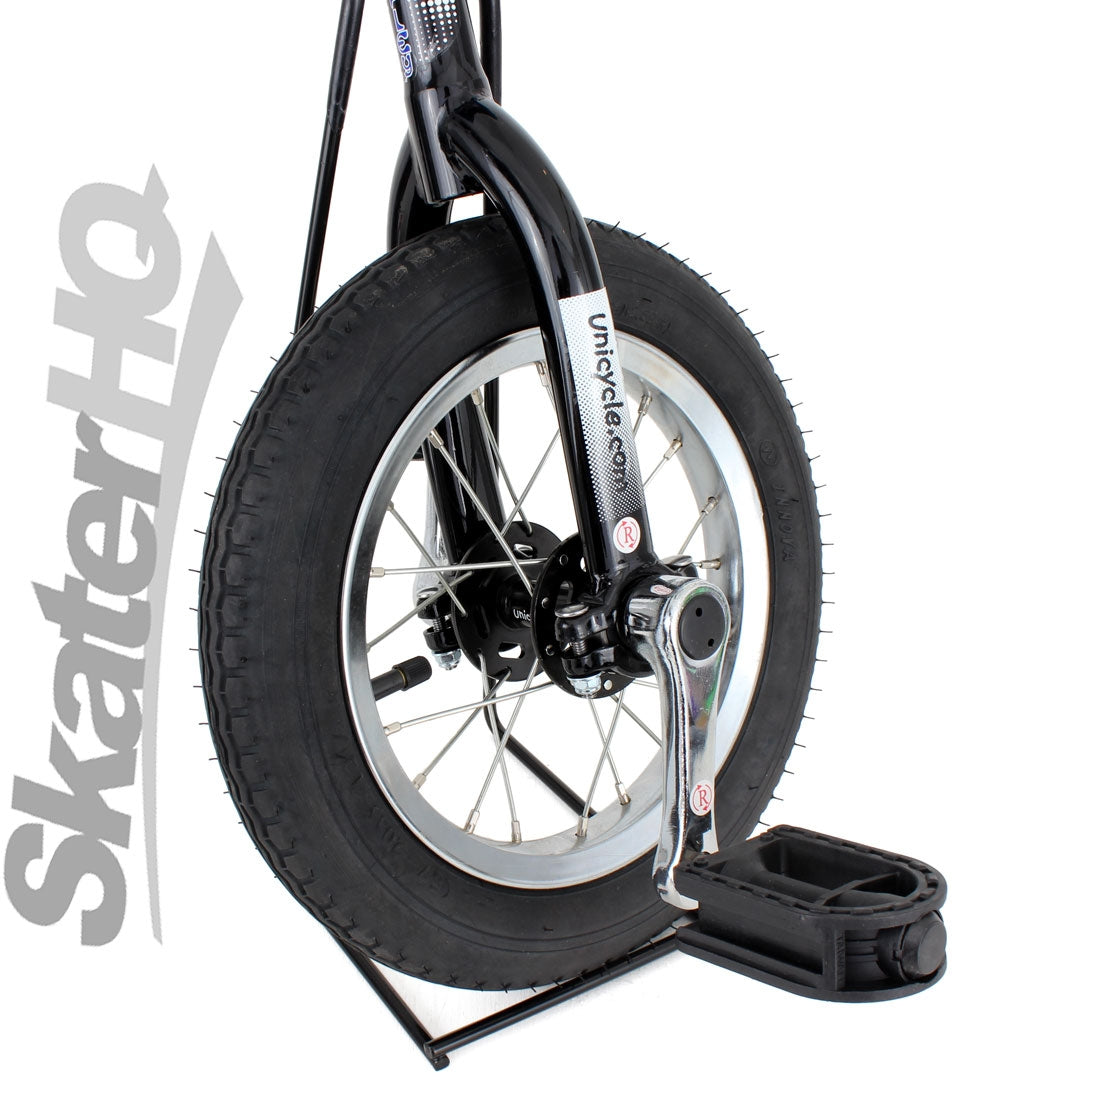 Hoppley 12inch Unicycle - Black/Blue Other Fun Toys